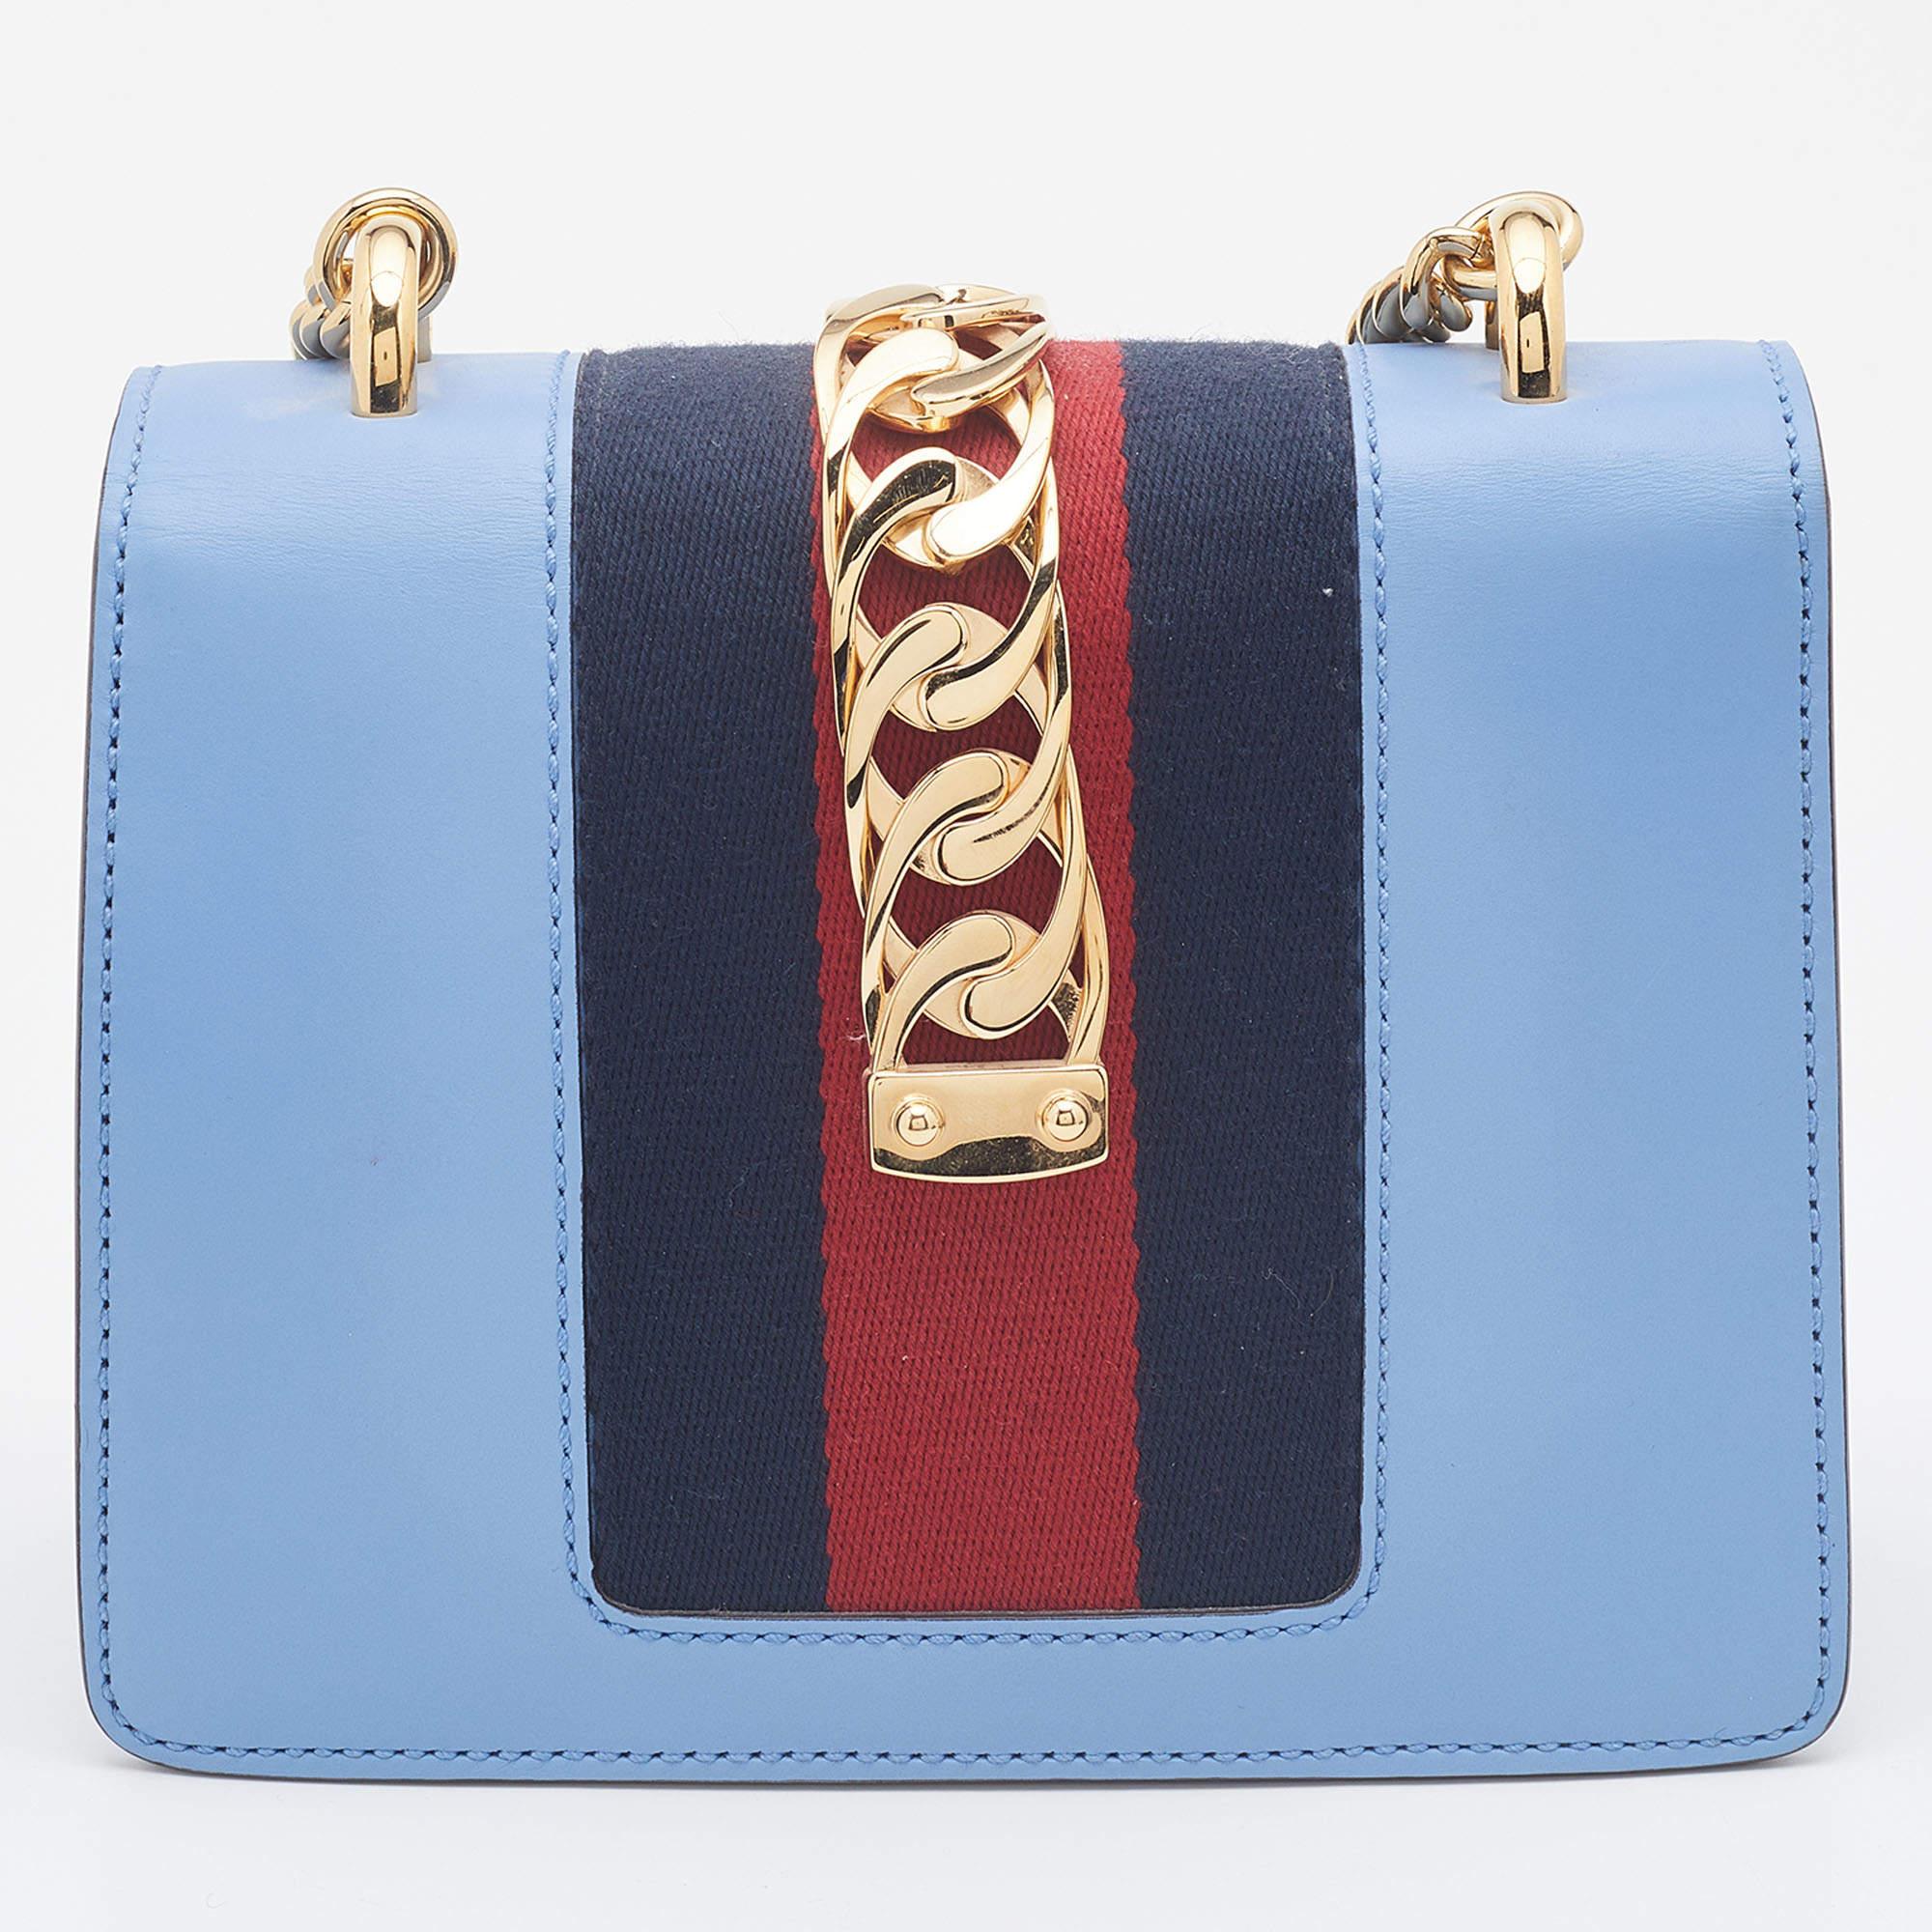 From the house of Gucci comes this gorgeous Sylvie shoulder bag that will perfectly complement all your outfits. It has been luxuriously crafted from leather and styled with a chain-web decorated flap and a buckle lock to secure the Alcantara